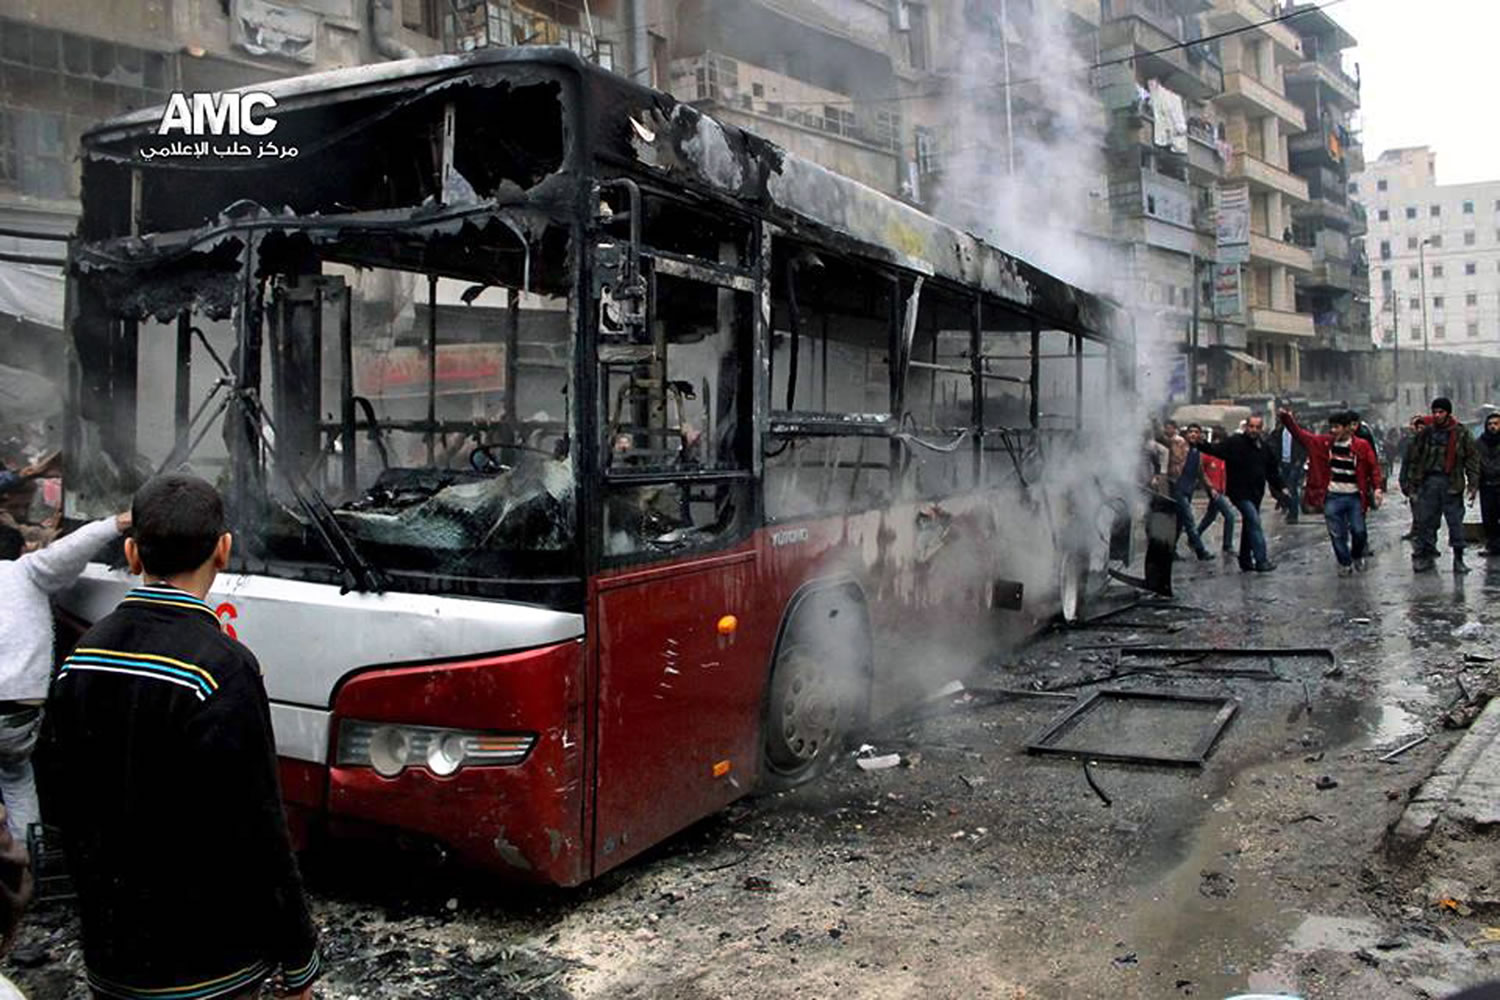 Syrians inspect a burnt bus after a missile fired by Syrian government aircraft hit the vehicle Tuesday in the rebel-held neighborhood of al-Bab in Aleppo, Syria.